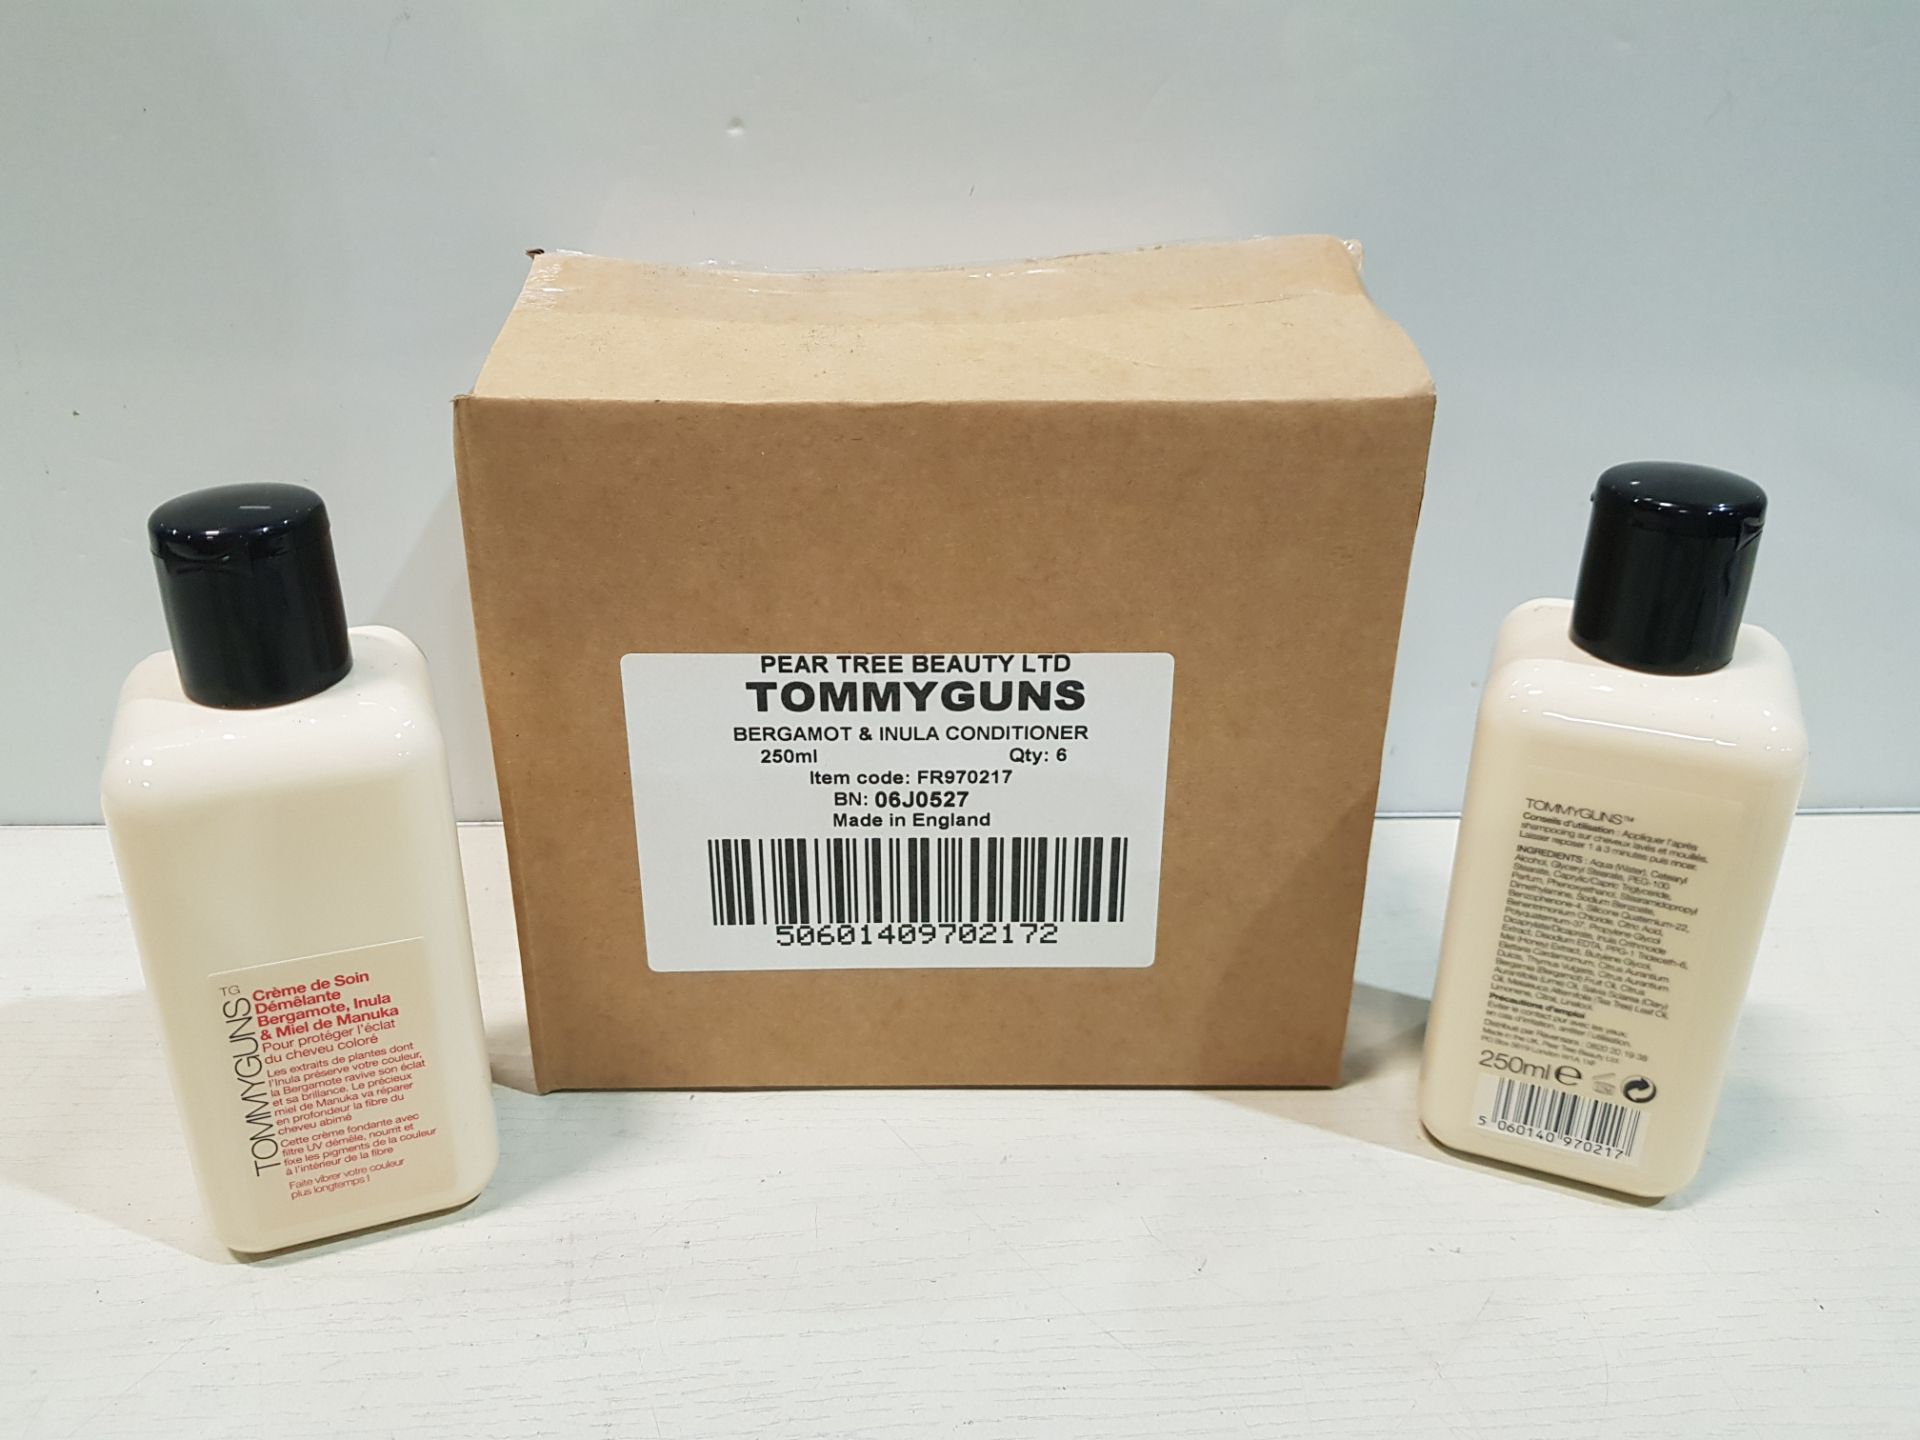 240 X BRAND NEW TOMMYGUNS BERGAMOT & INULA CONDITIONER 250ML QTY 6 IN ONE BOX 40 BOXES IN TOTAL.